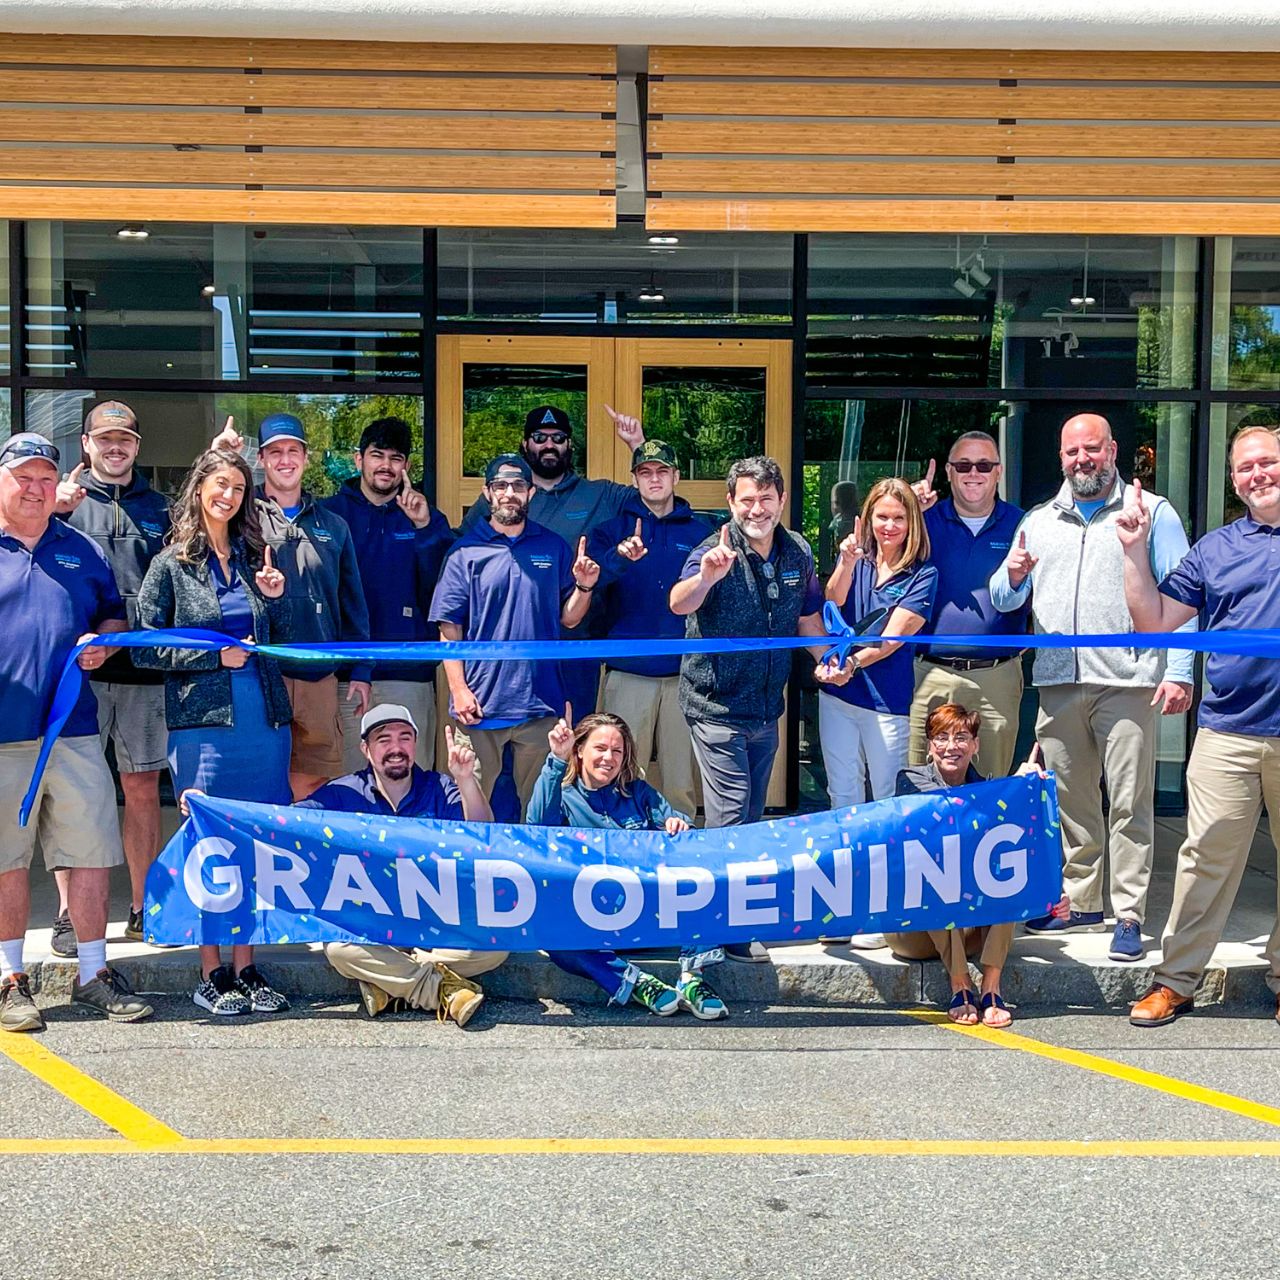 Mainely Tubs staff outside of their Hanover, MA showroom holding a grand opening sign.